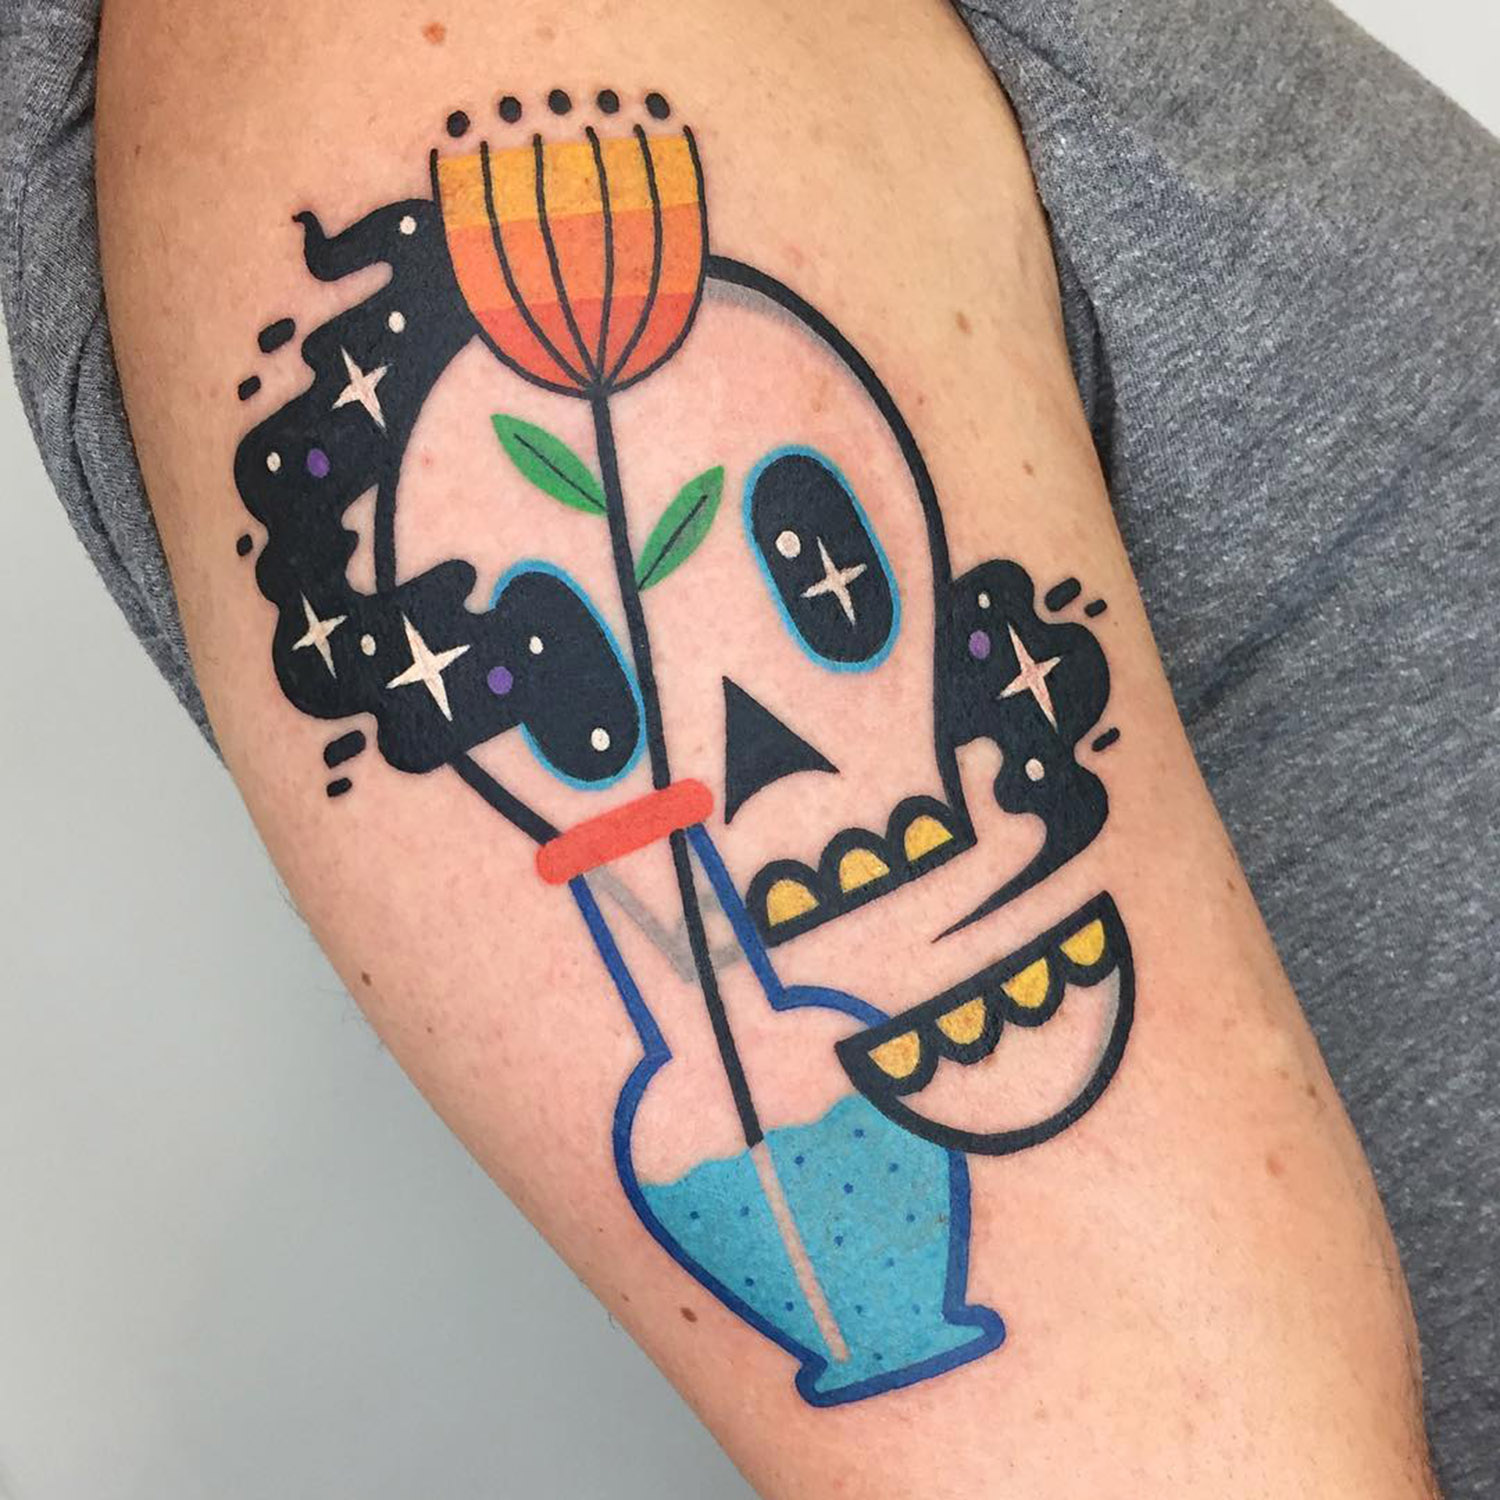 Skull tattoo by Winston the Whale